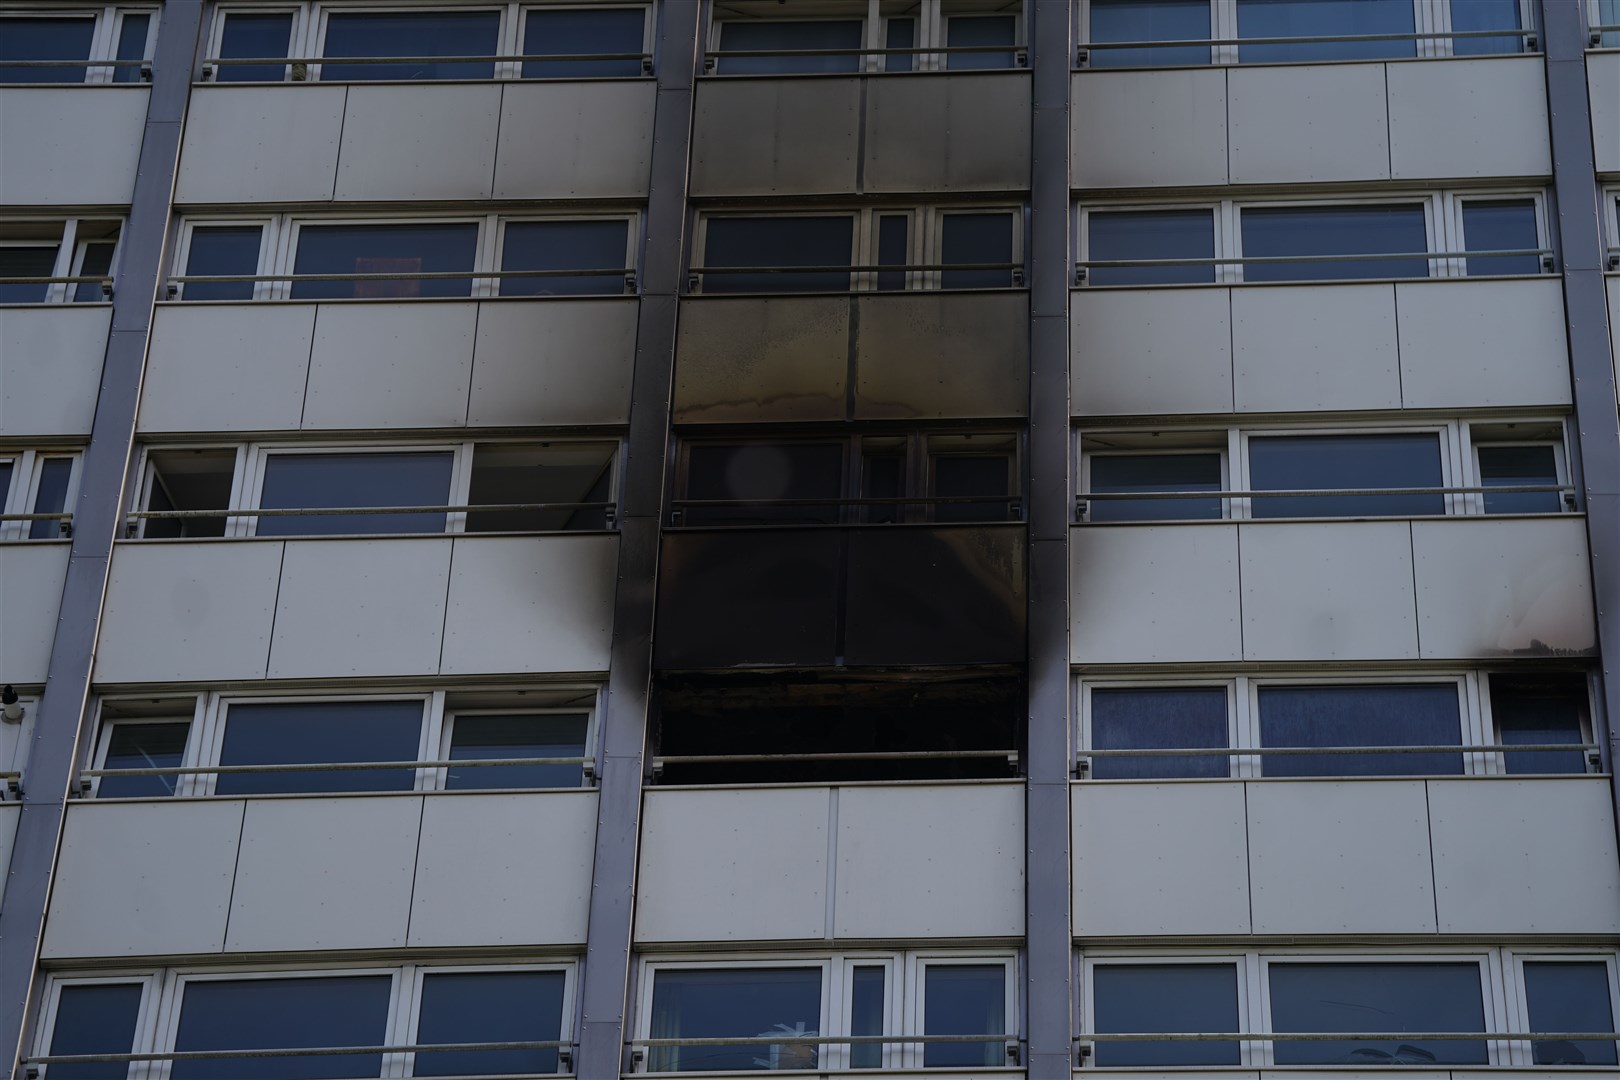 Scorch marks can be seen on the 12th floor of a tower block at Stebbing House on Queensdale Crescent, Shepherd’s Bush (Victoria Jones/PA)